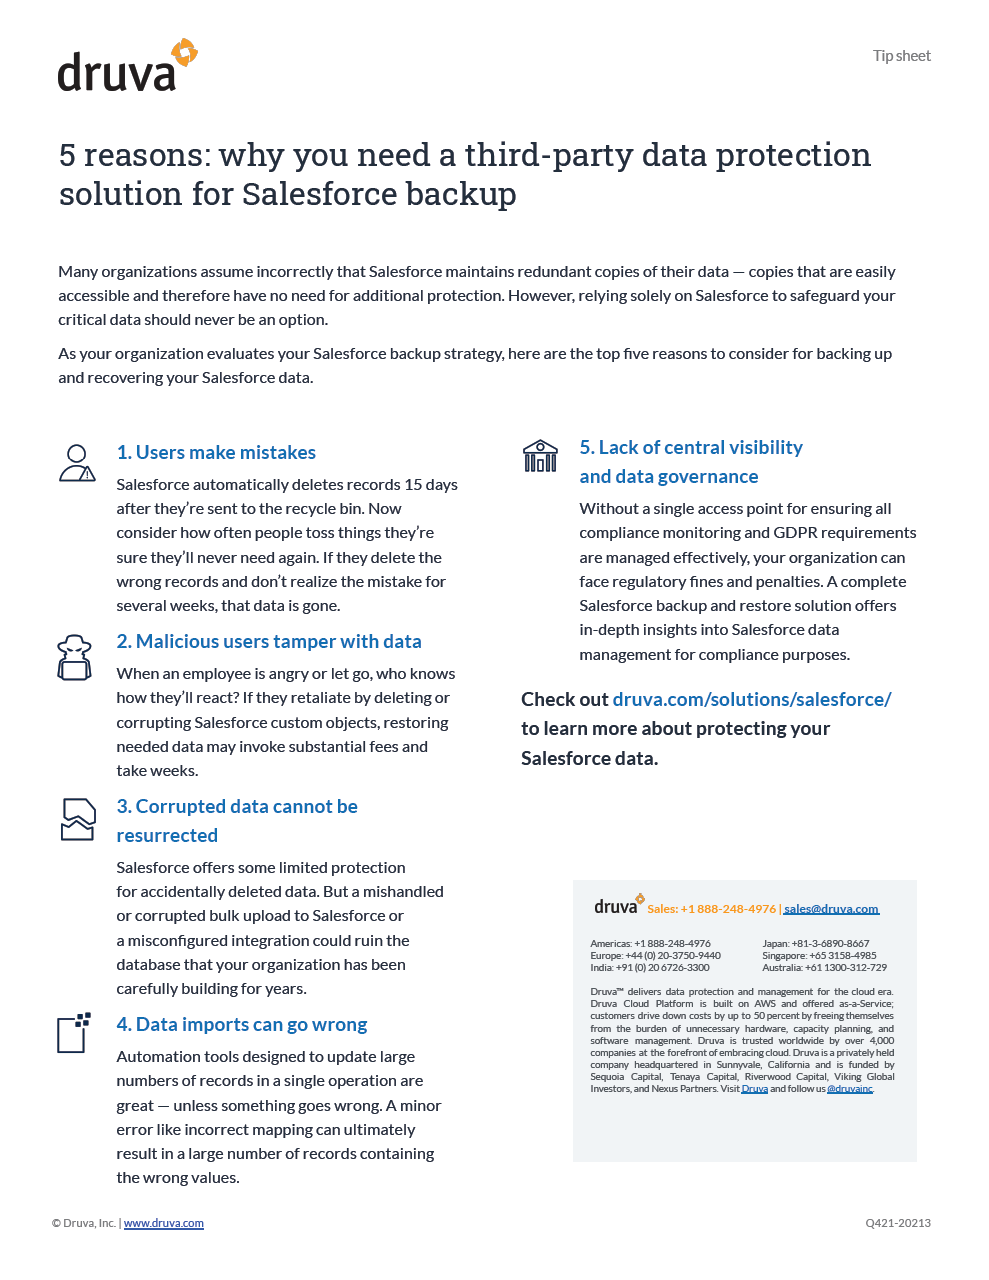 5 reasons: why you need a third-party data protection solution for Salesforce backup